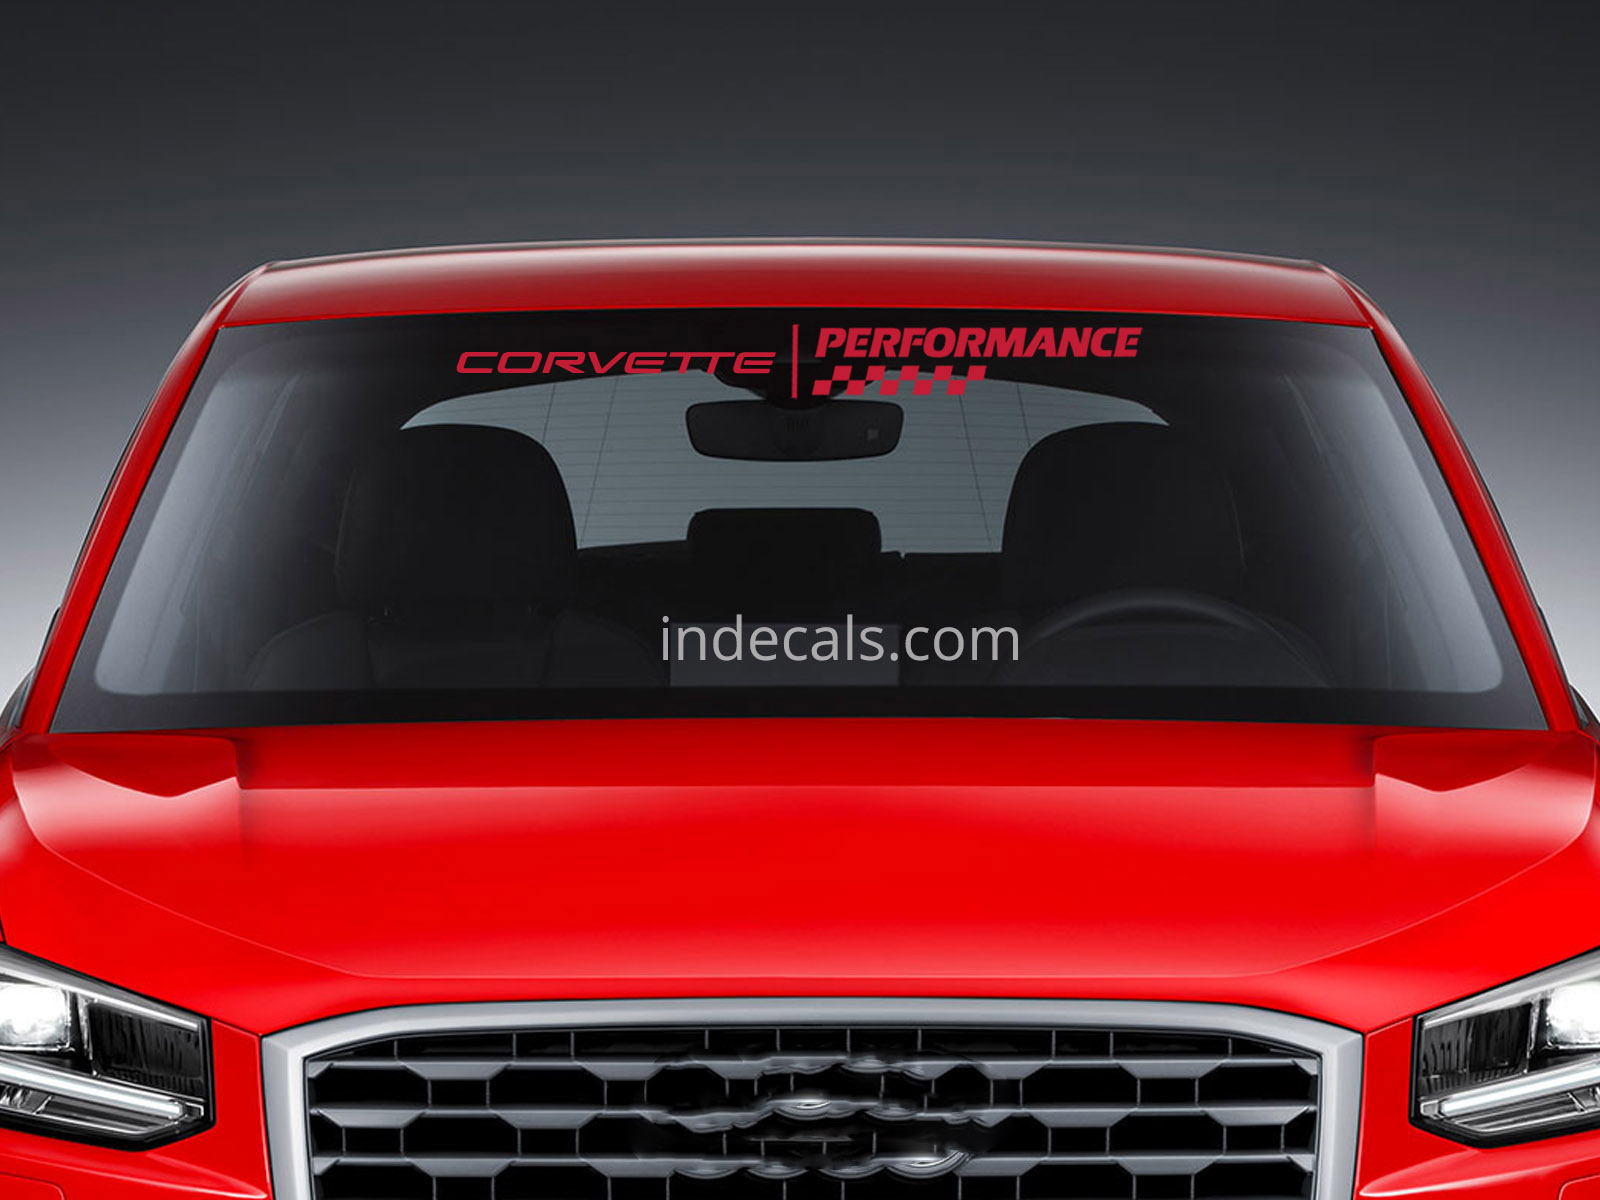 1 x Corvette Performance Sticker for Windshield or Back Window - Red